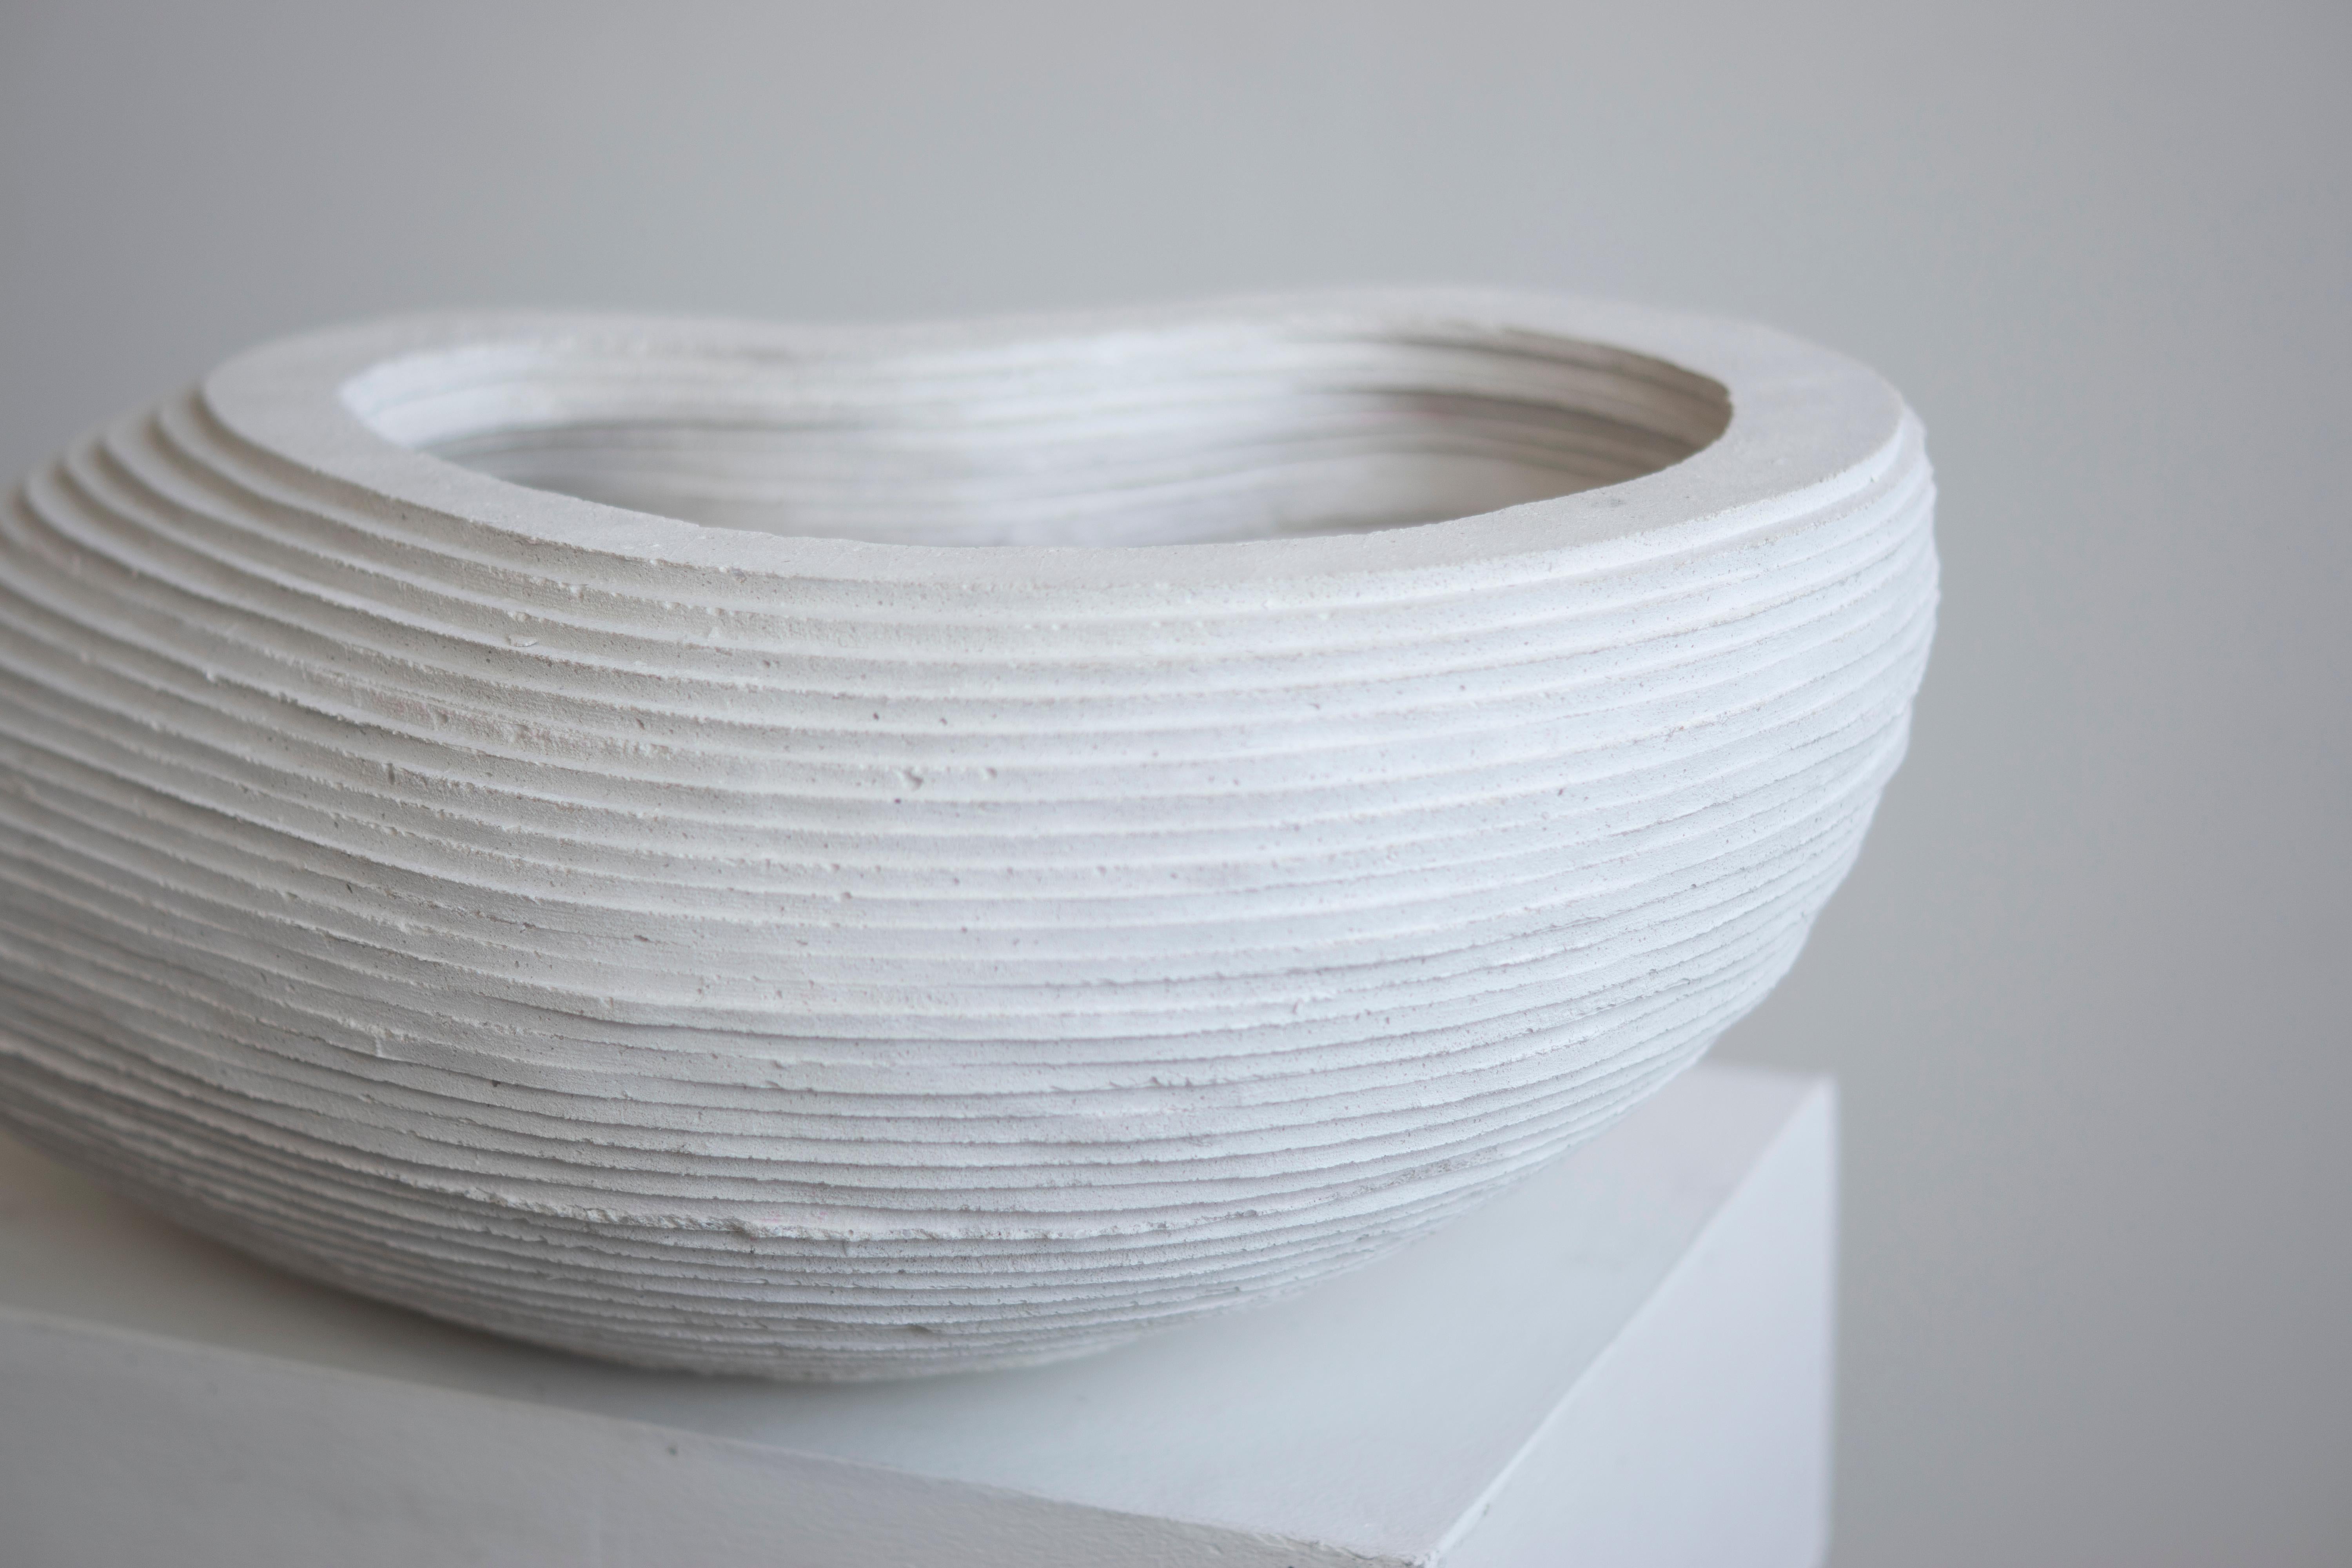 White hand-cast bowl for indoor and outdoor use.

At the intersection of art, craft, and design, Concrete Poetics' debut collection of hand-cast cement sculptural furniture and accessories streamlines visually intriguing and dynamic forms